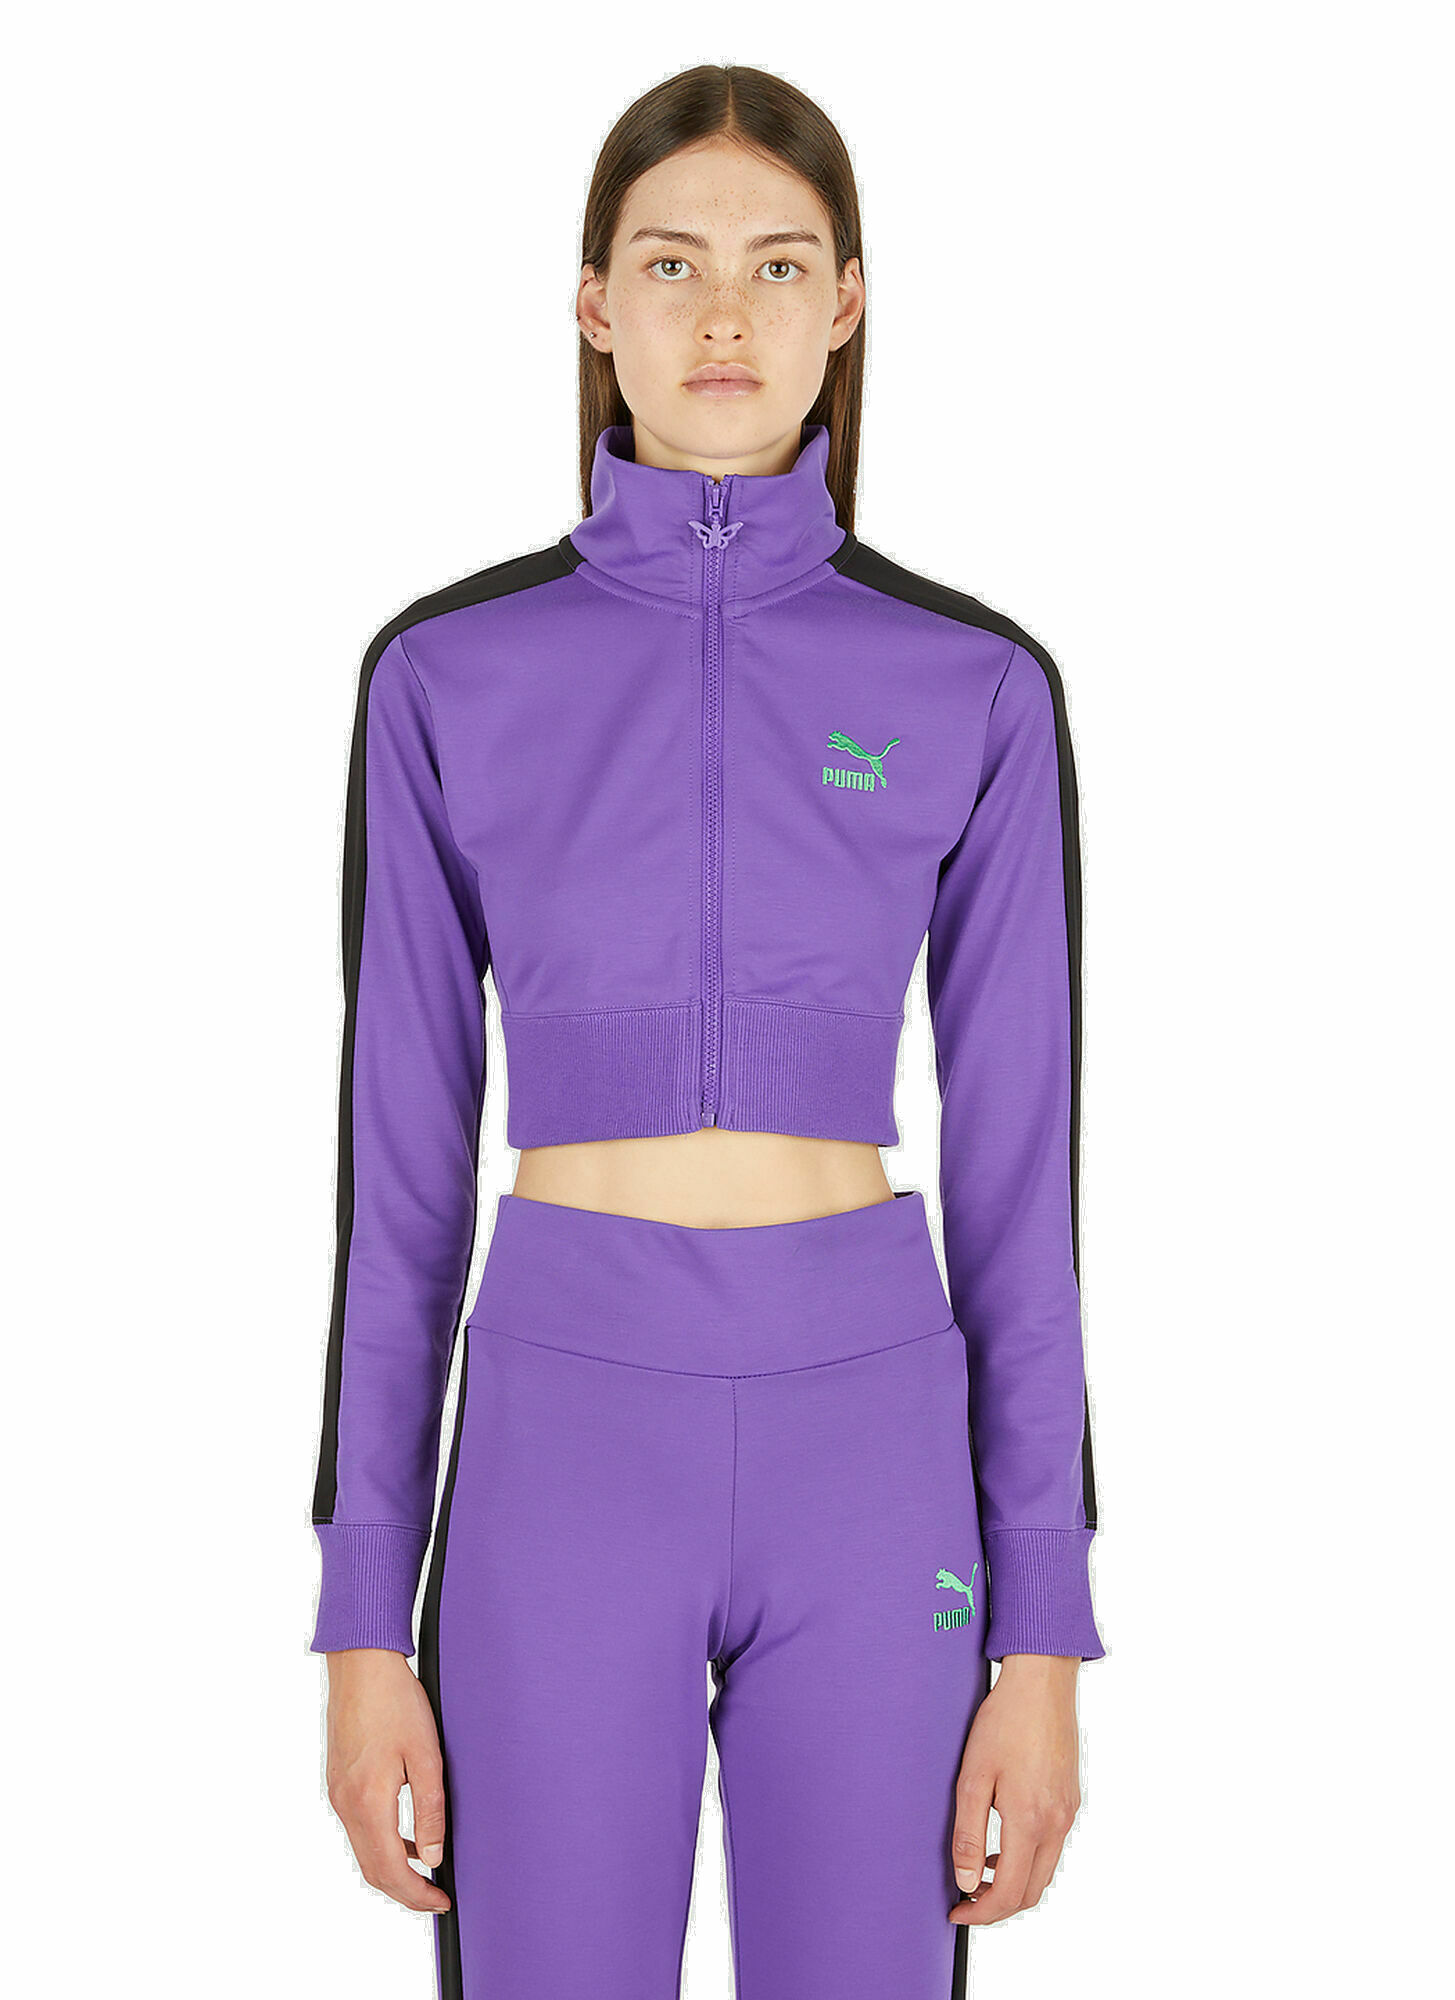 Photo: T7 Cropped Track Top in Purple